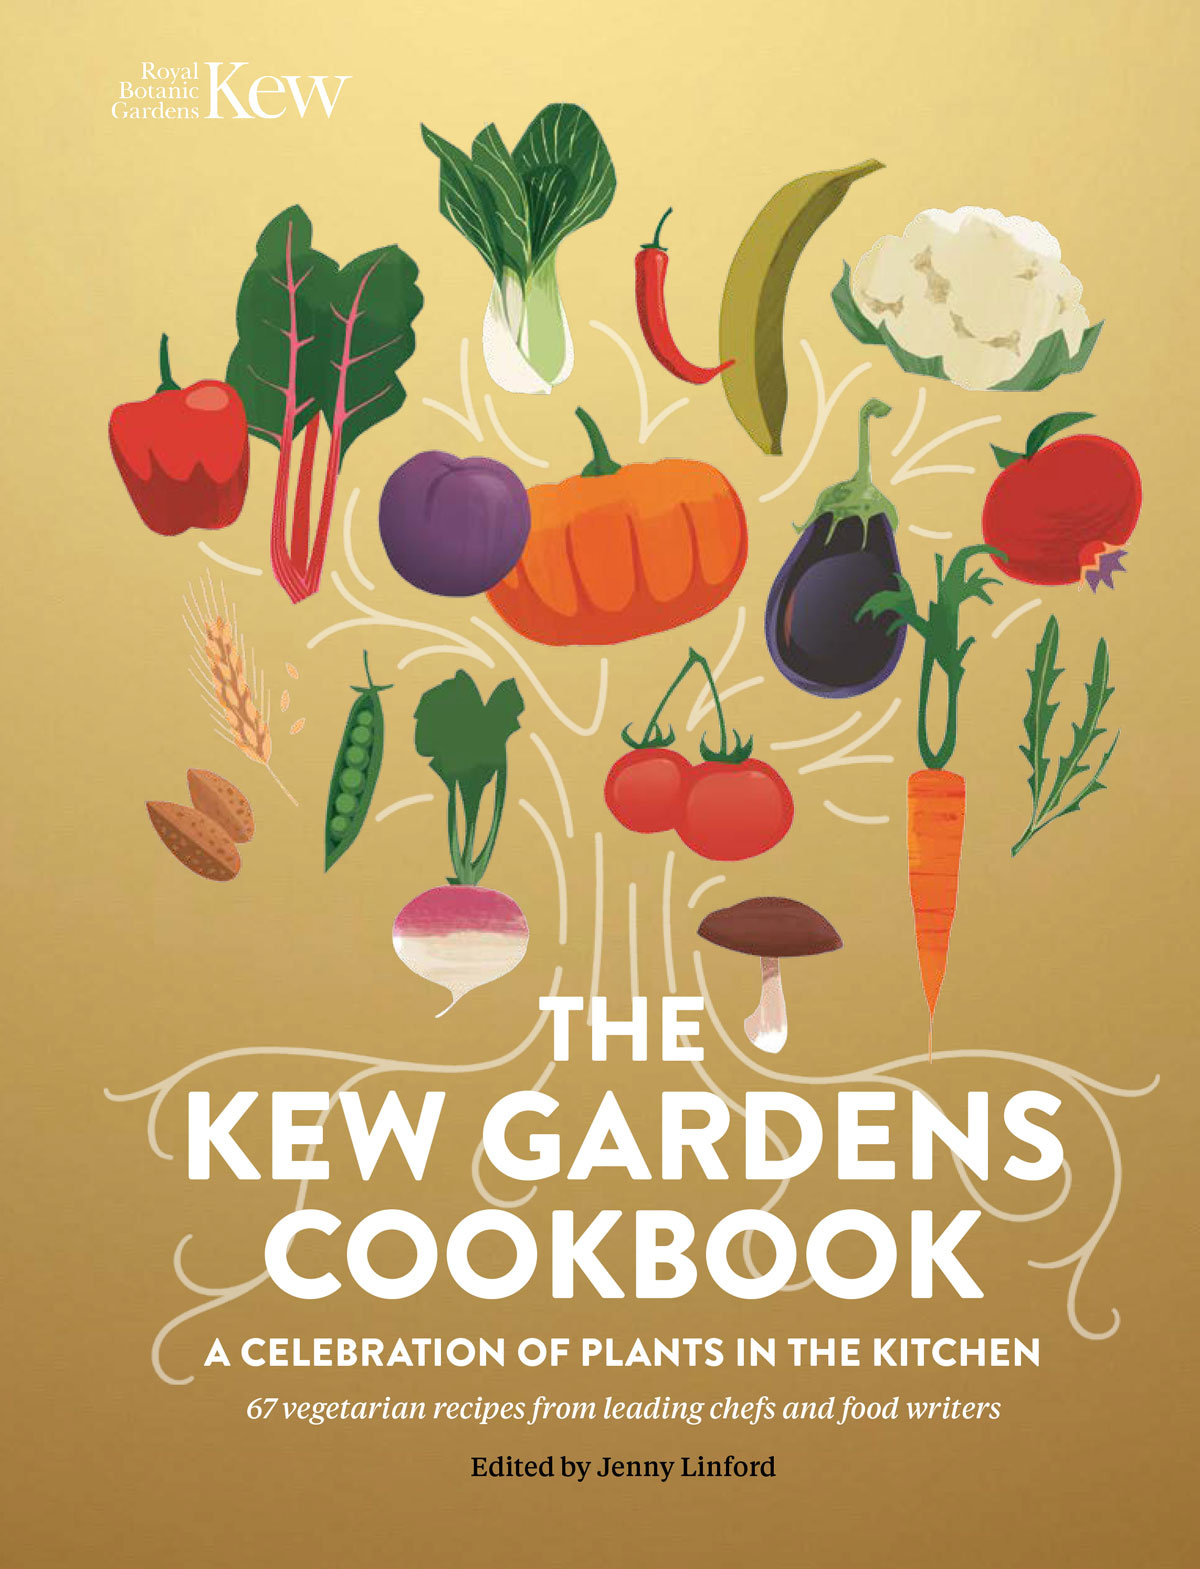 Book cover of The Kew Gardens Cookbook edited by Jenny Linford